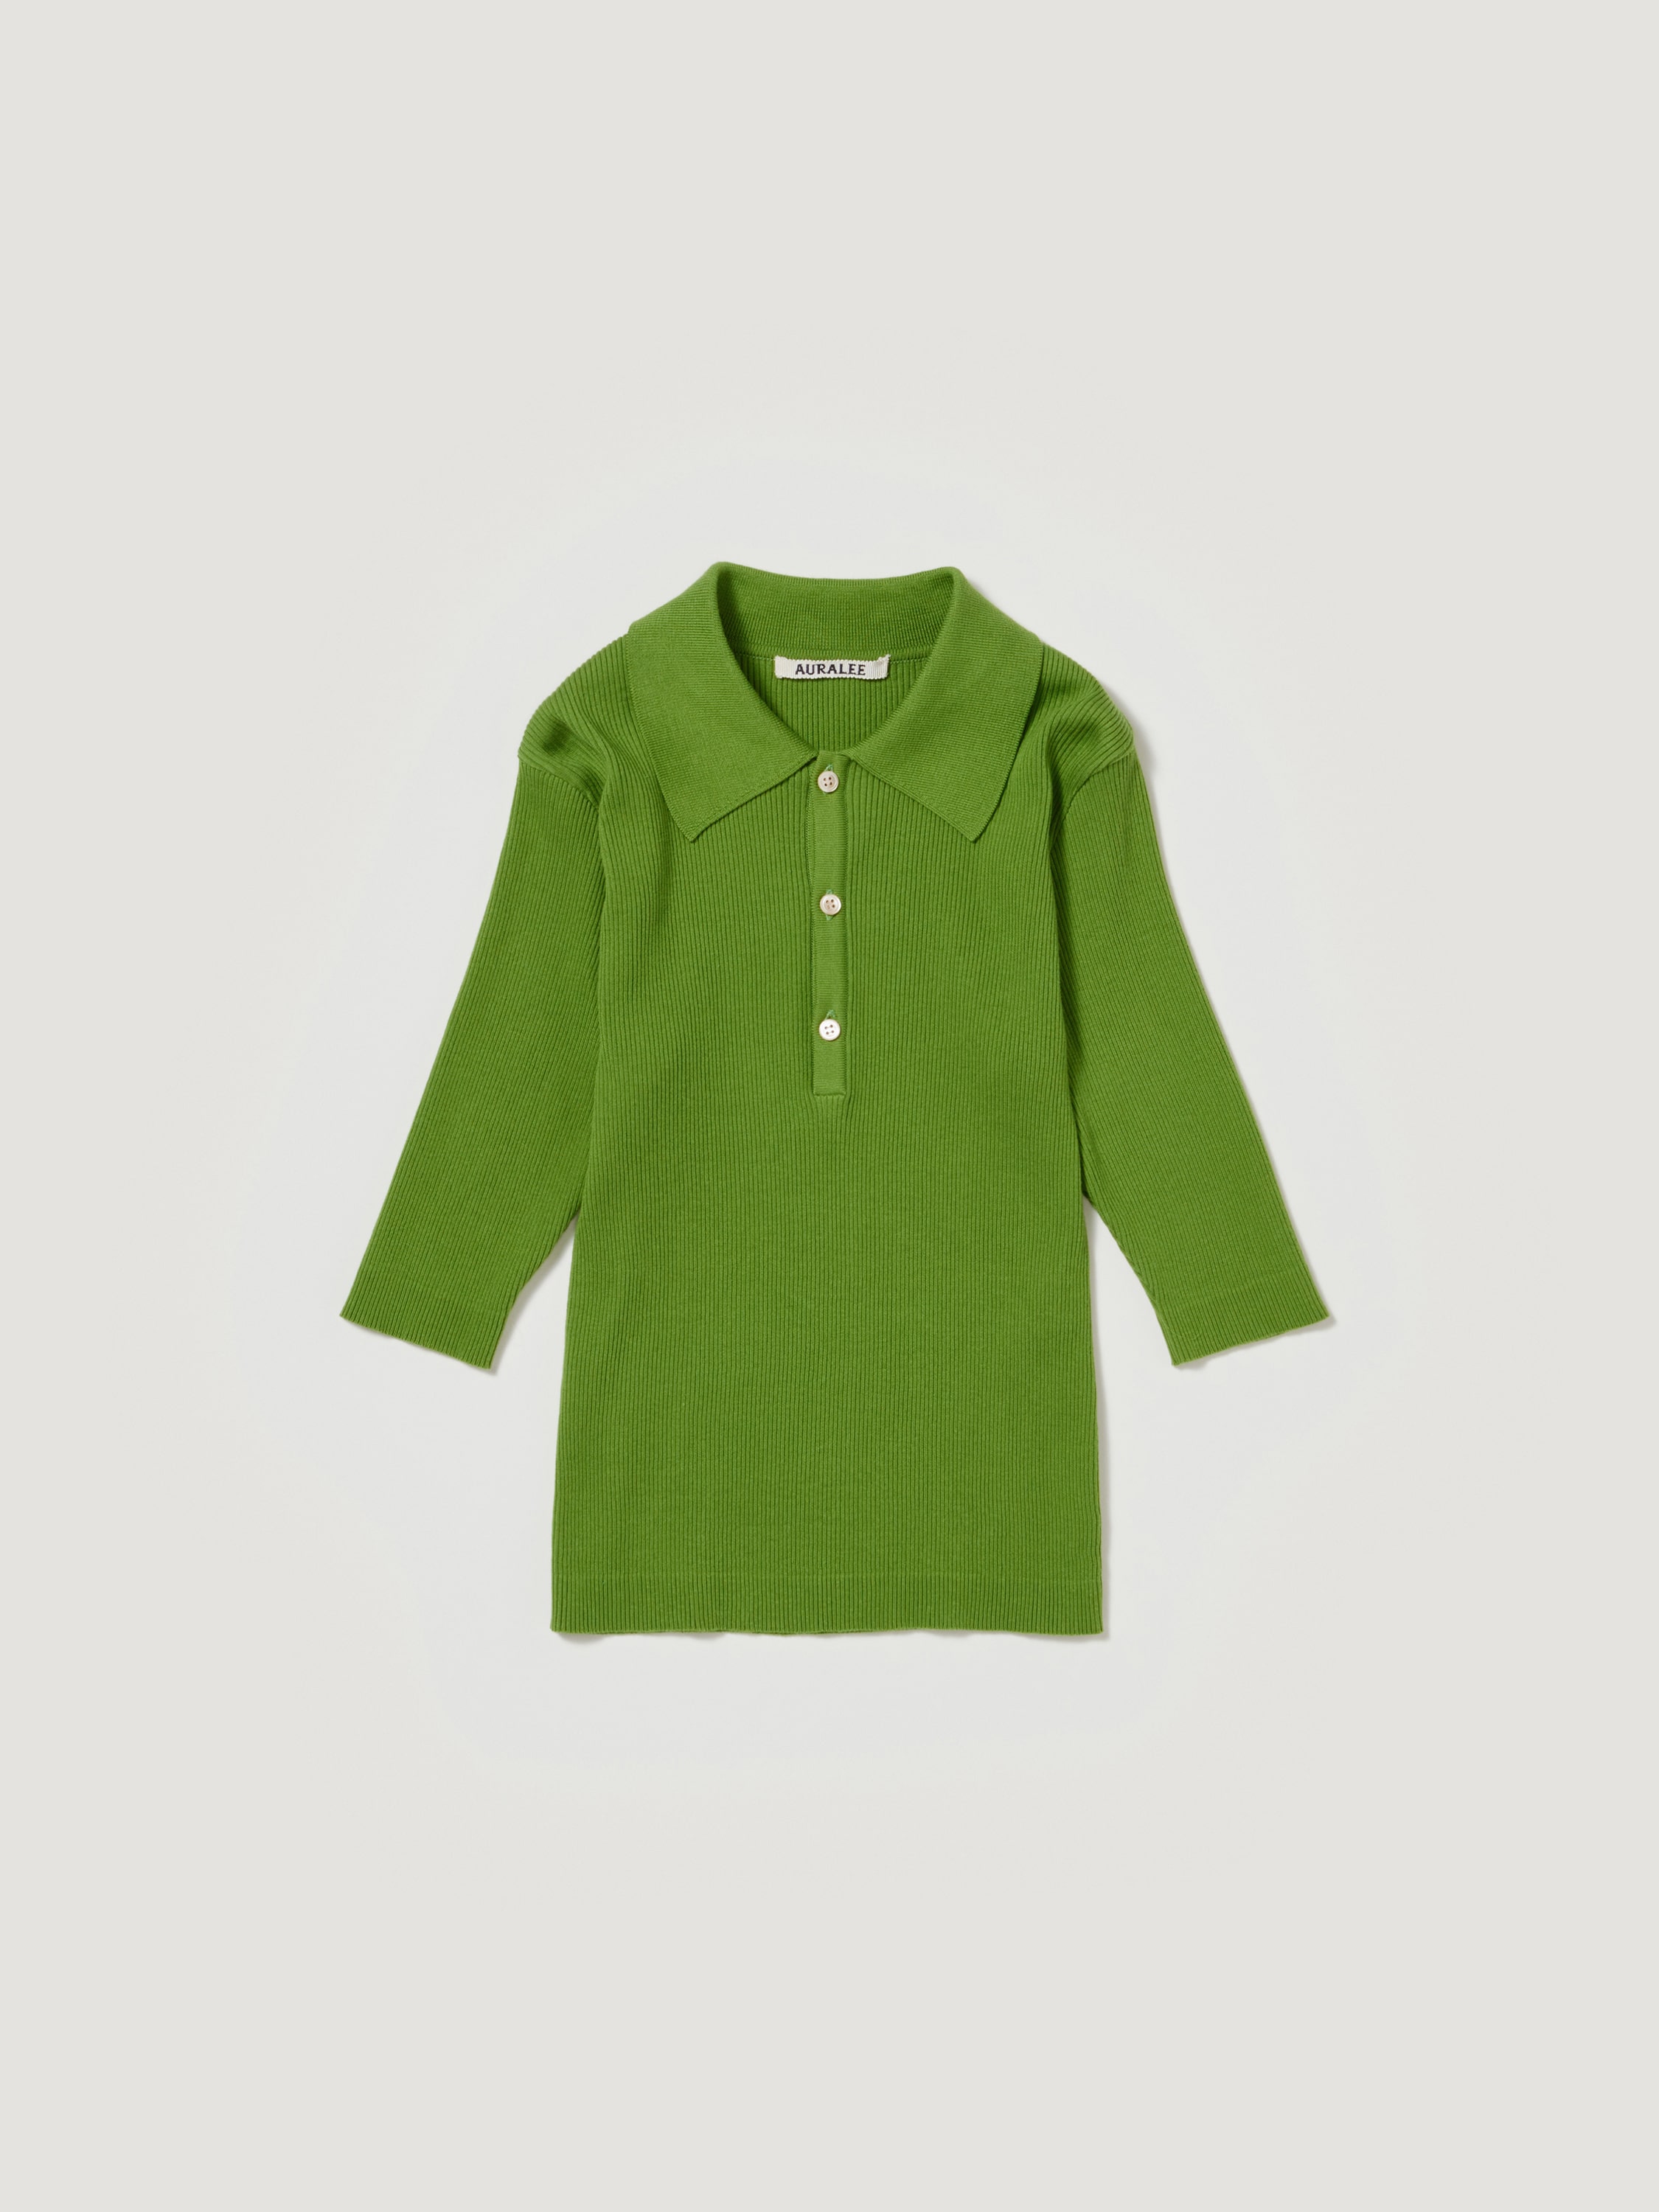 GIZA HIGH GAUGE RIB KNIT POLO - AURALEE Official Website